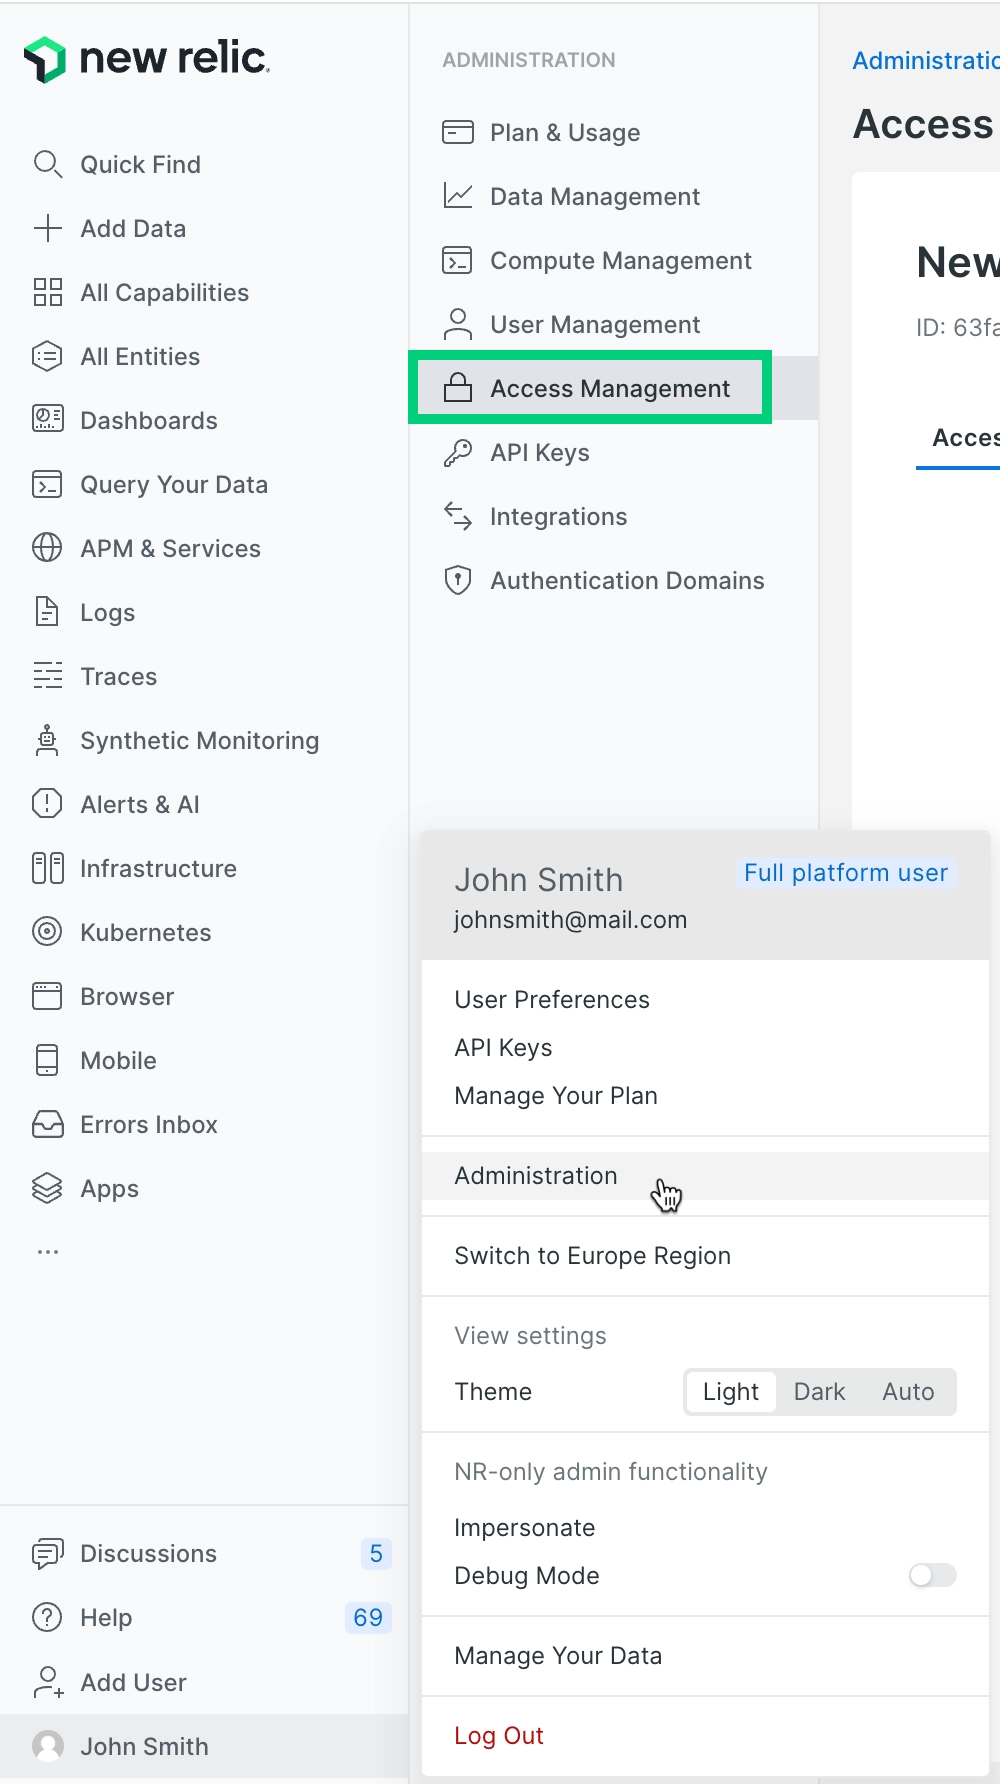 New Relic organization and access UI - default group access